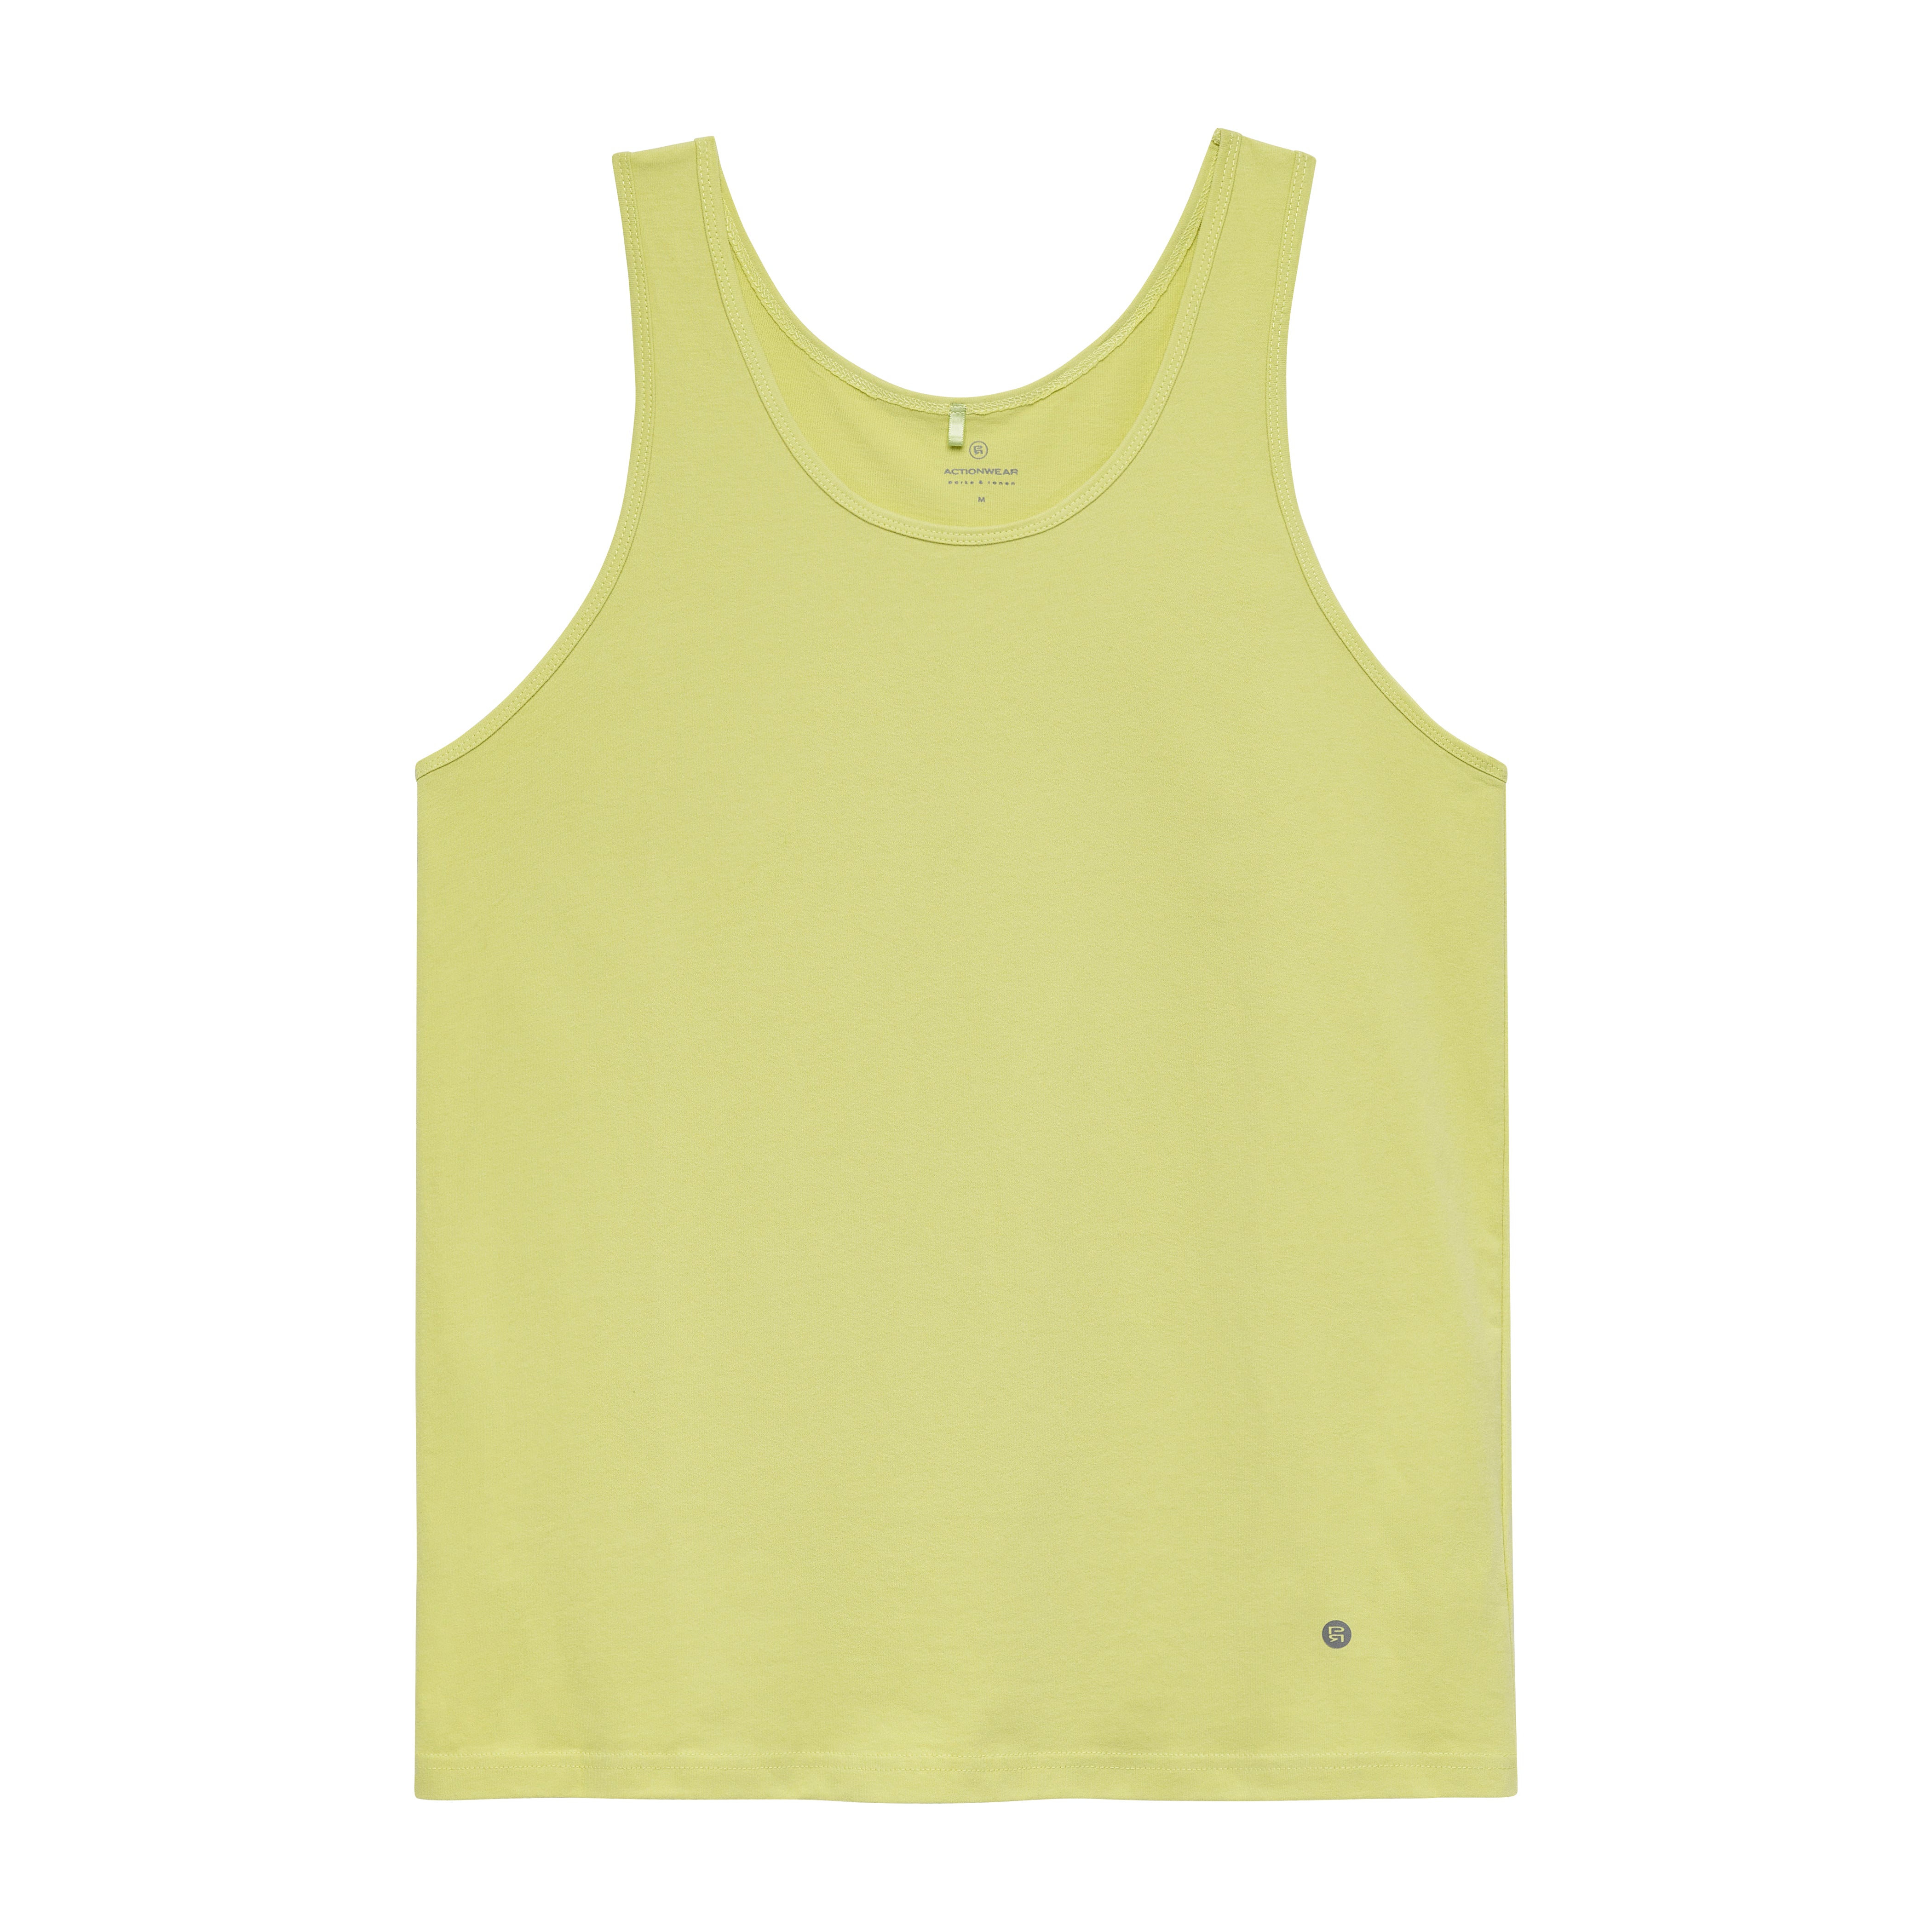 SAVE 70%- ACTIONWEAR Citron Solid Cotton Tank Top